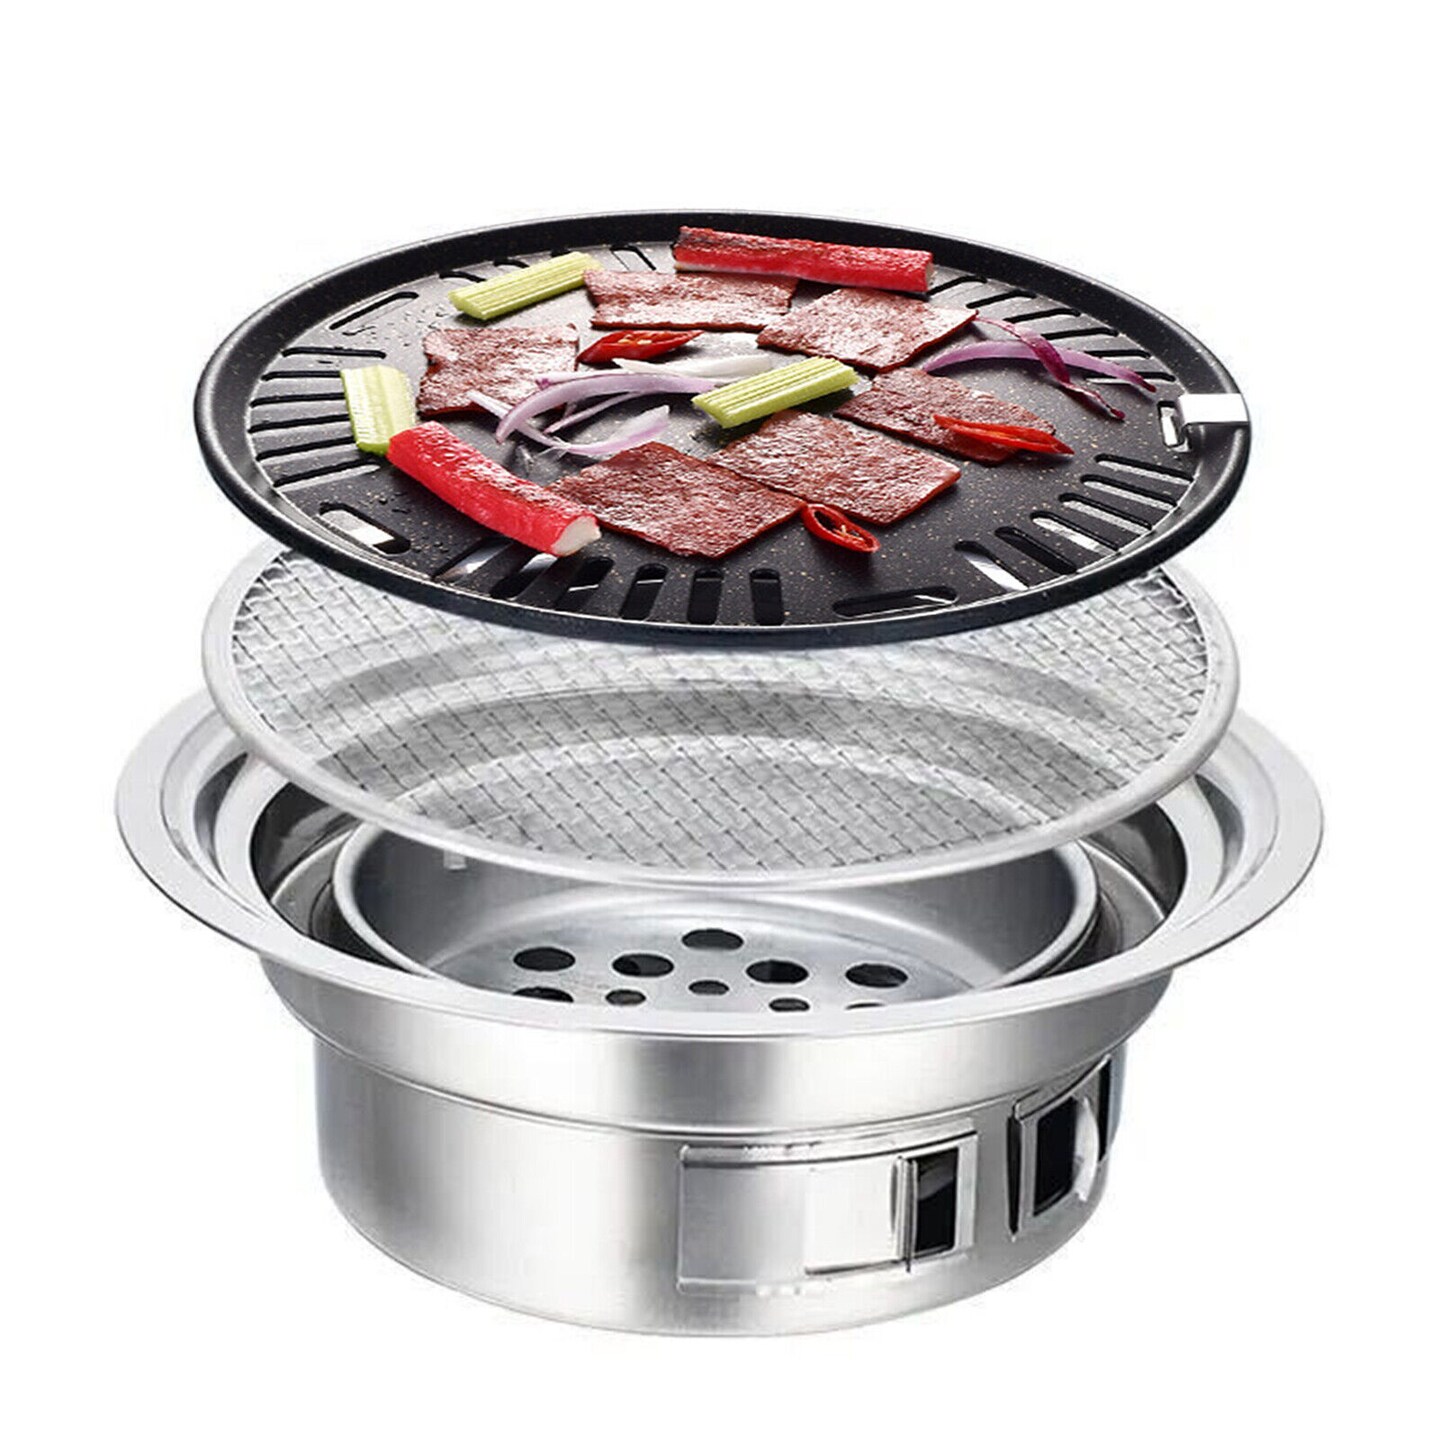 Kitcheniva Portable Stainless Steel BBQ Charcoal Grill Stove Oven